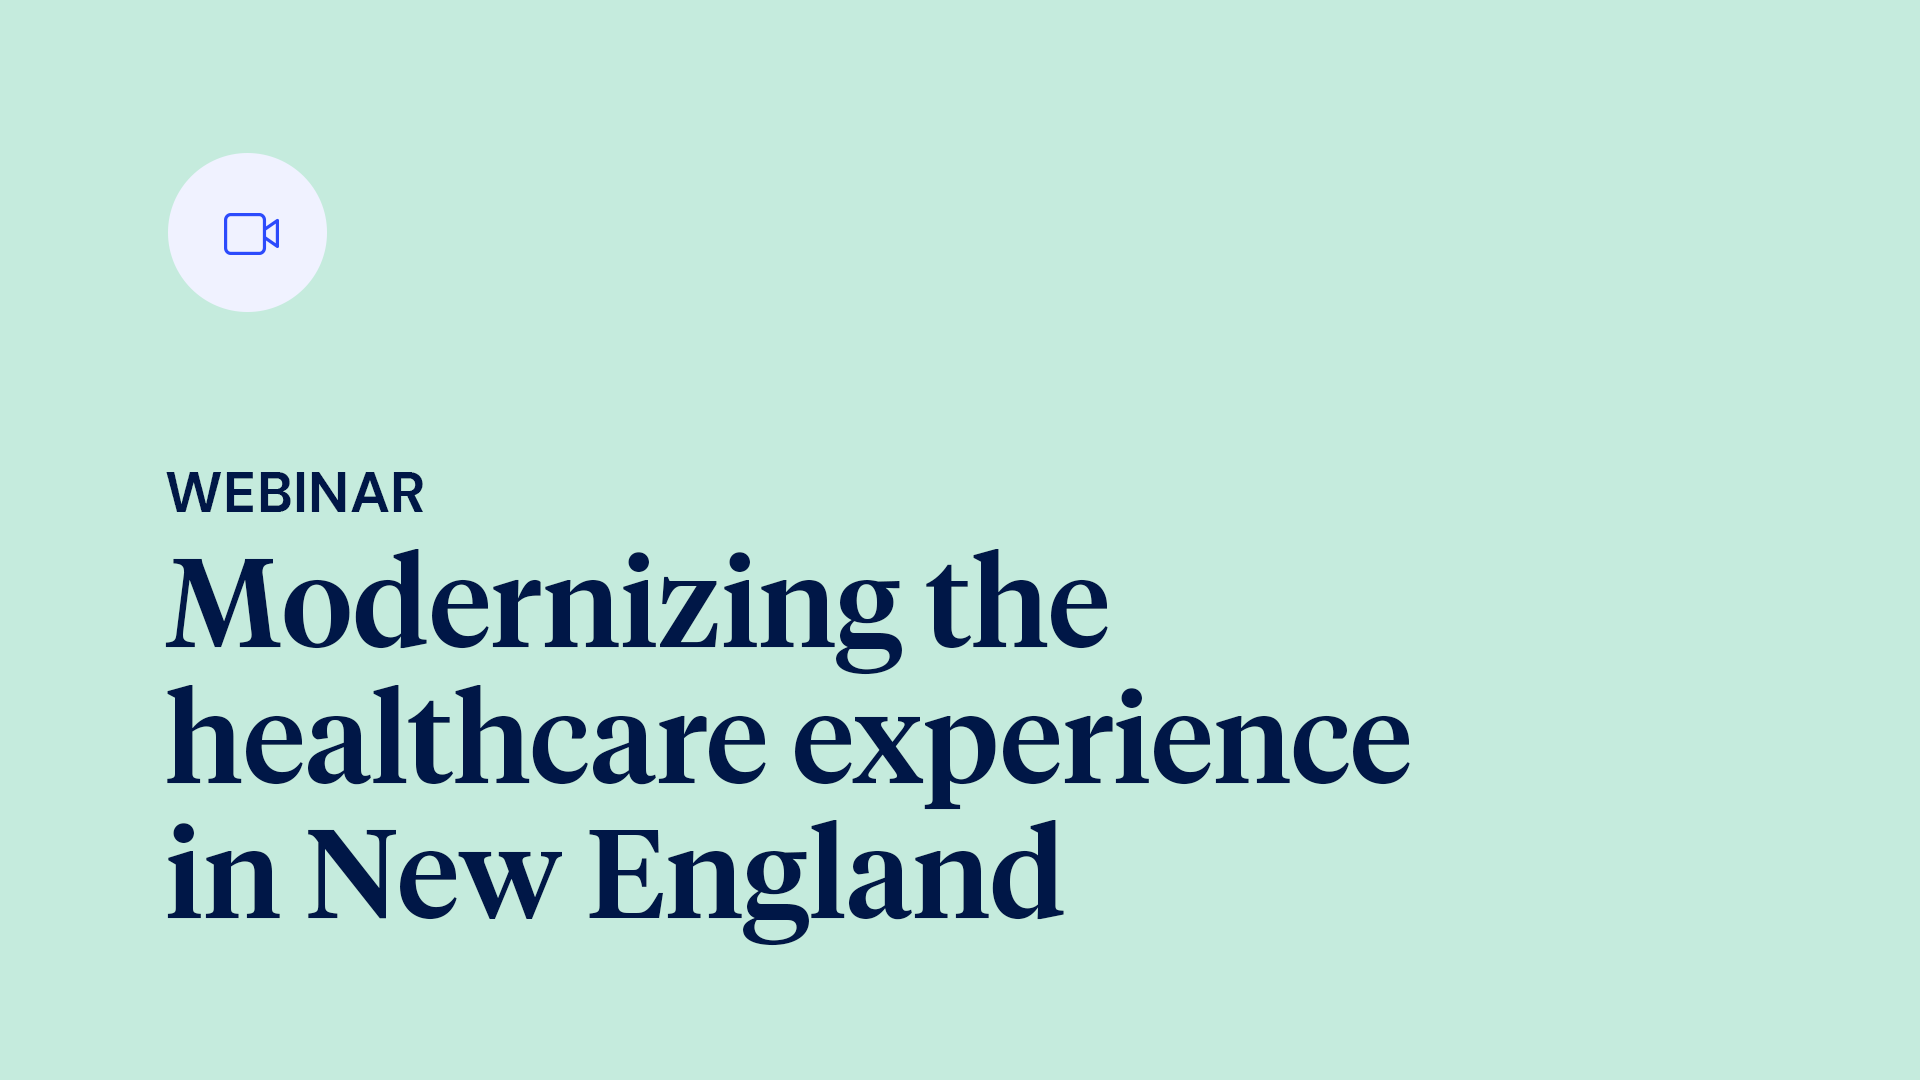 Modernizing the healthcare experience in New England